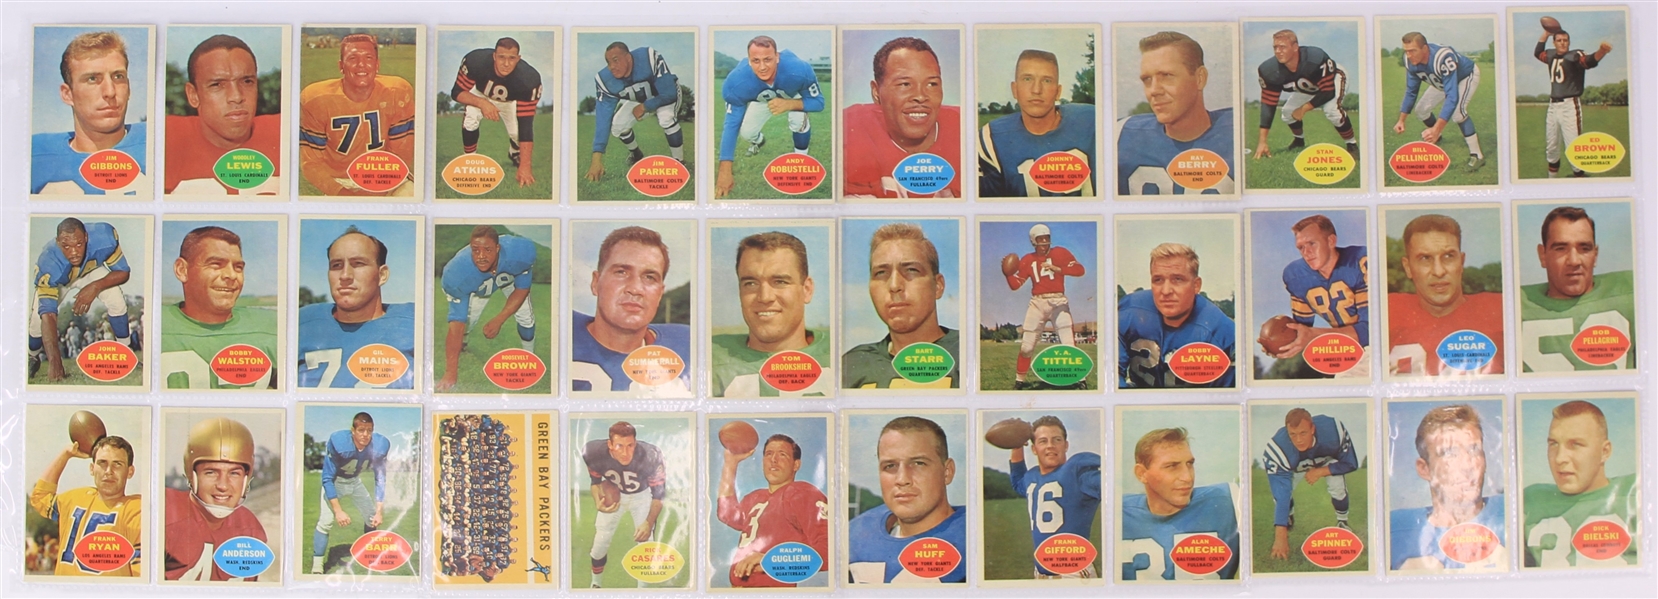 1960 Topps Football Trading Cards - Lot of 36 w/ Bart Starr, Johnny Unitas, Alan Ameche, Frank Gifford & More